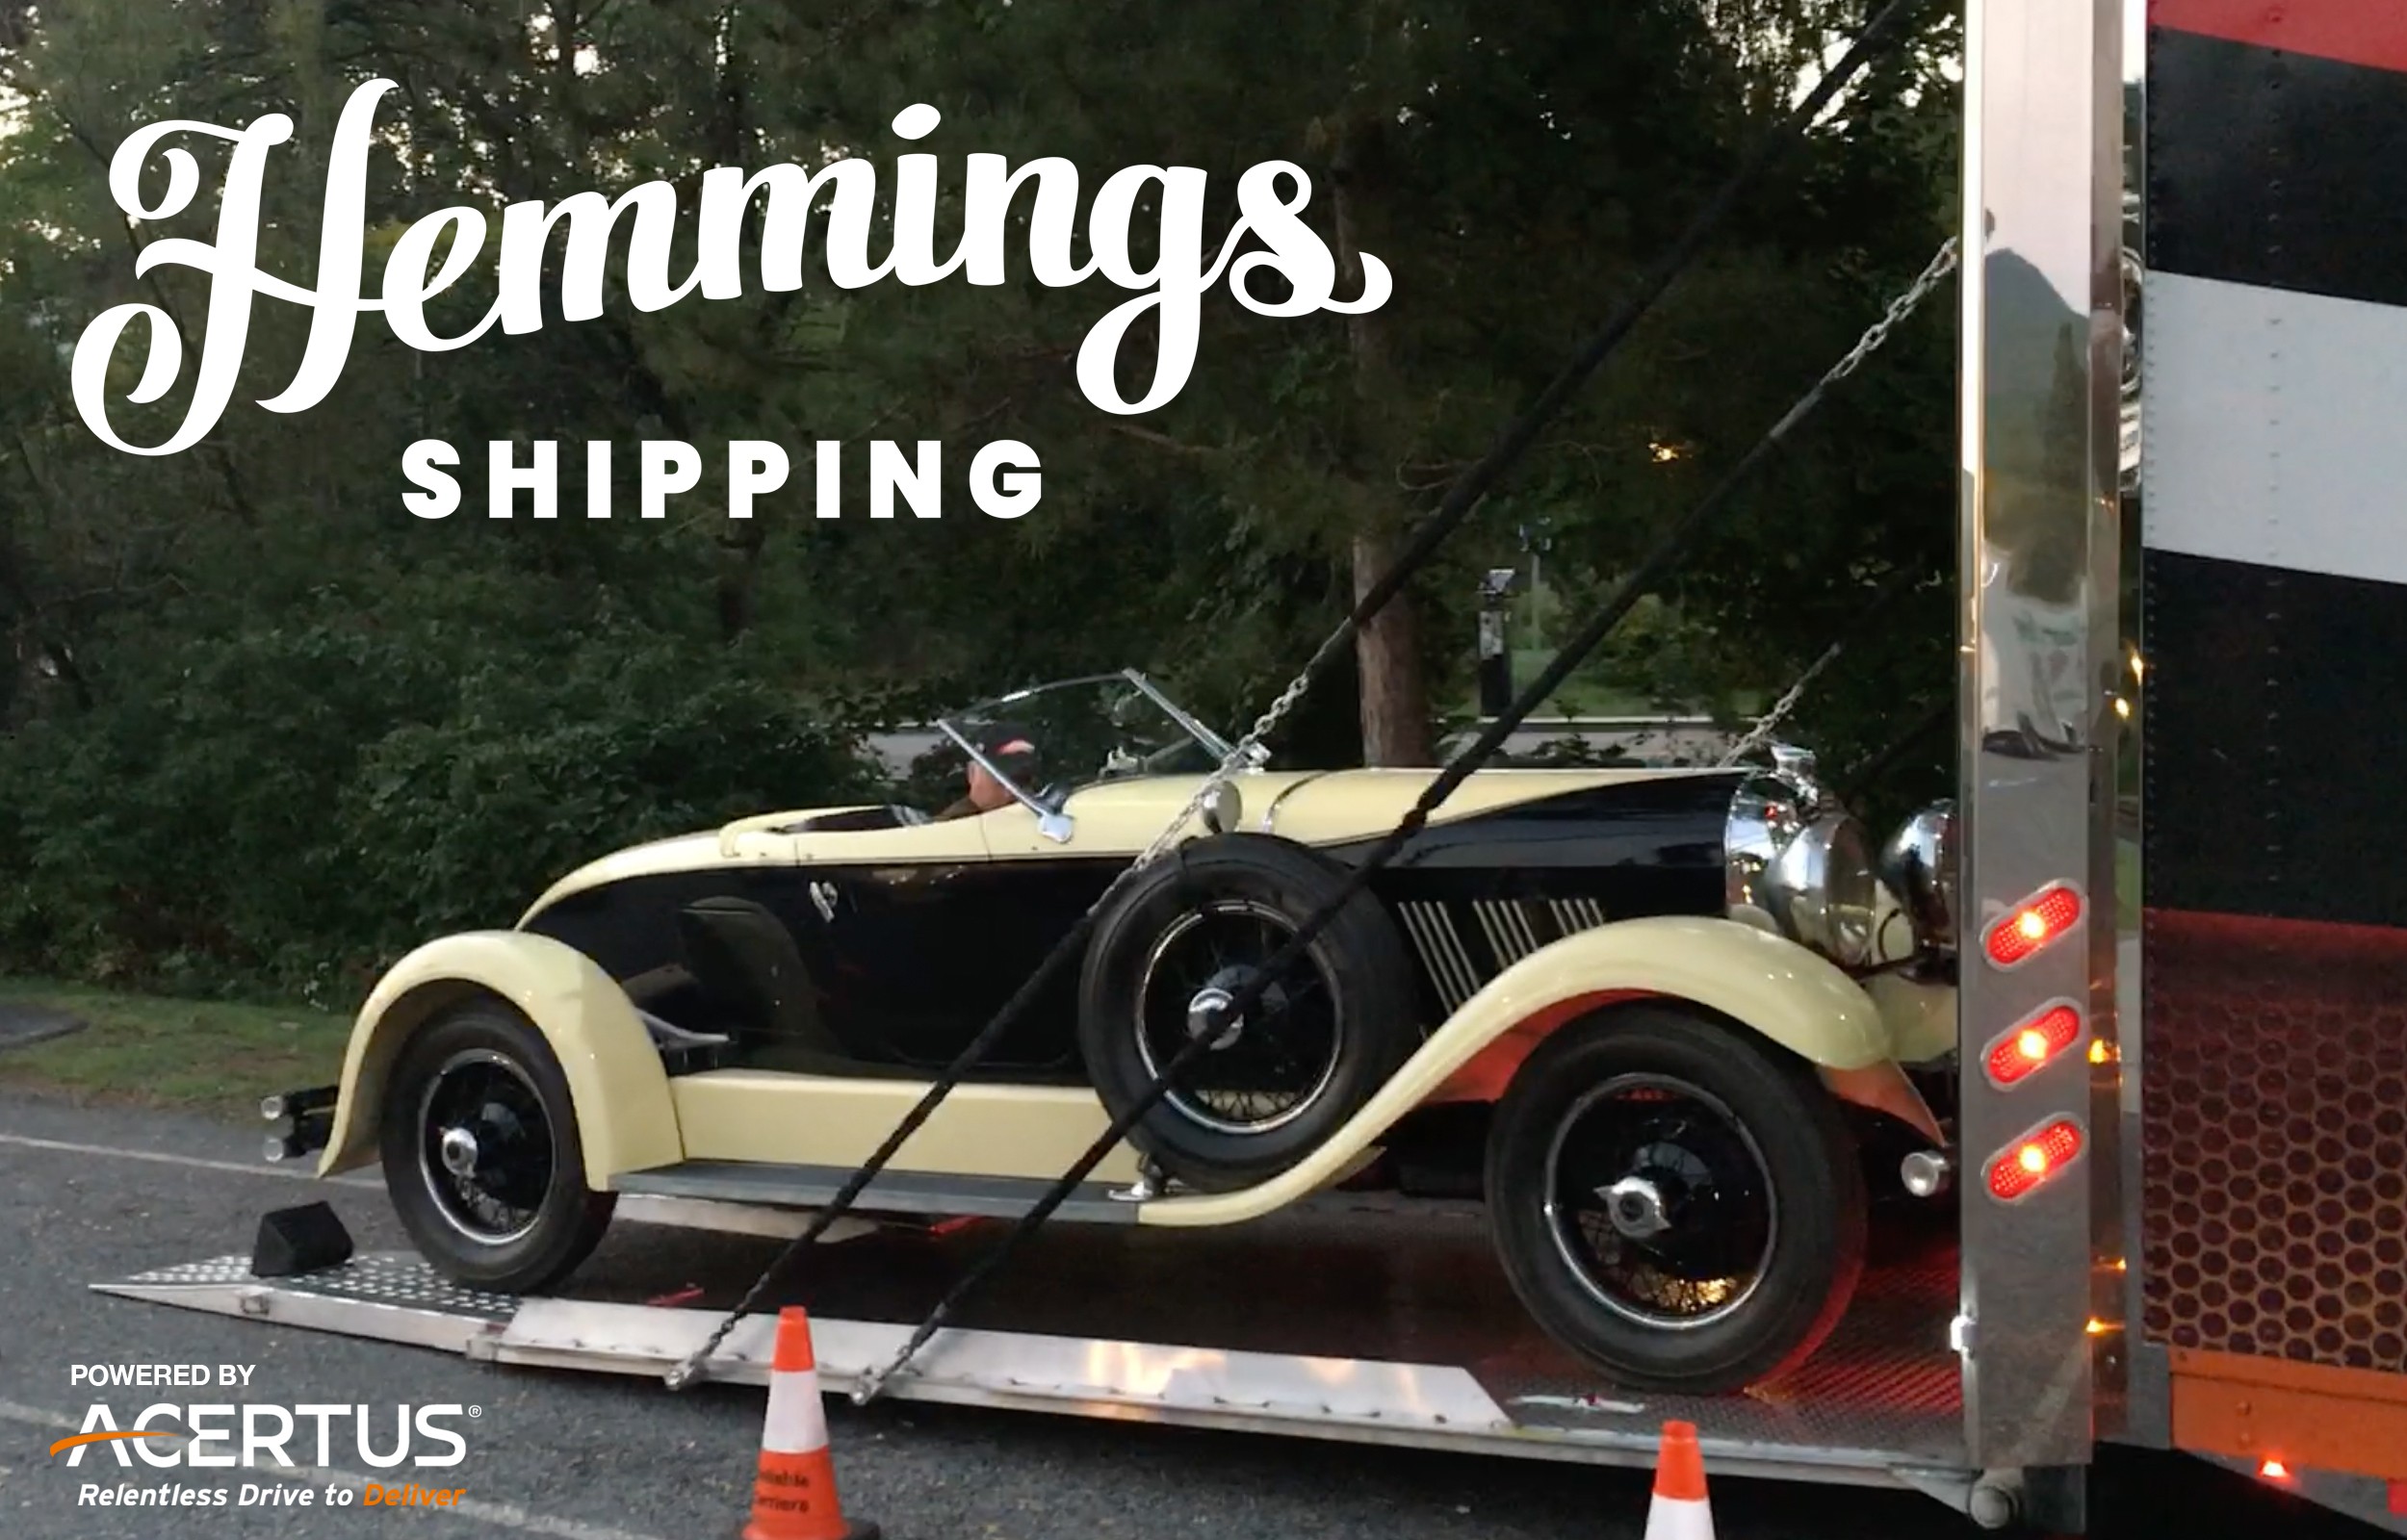 Hemmings Now Offers Classic and Collector Car Shipping Services!